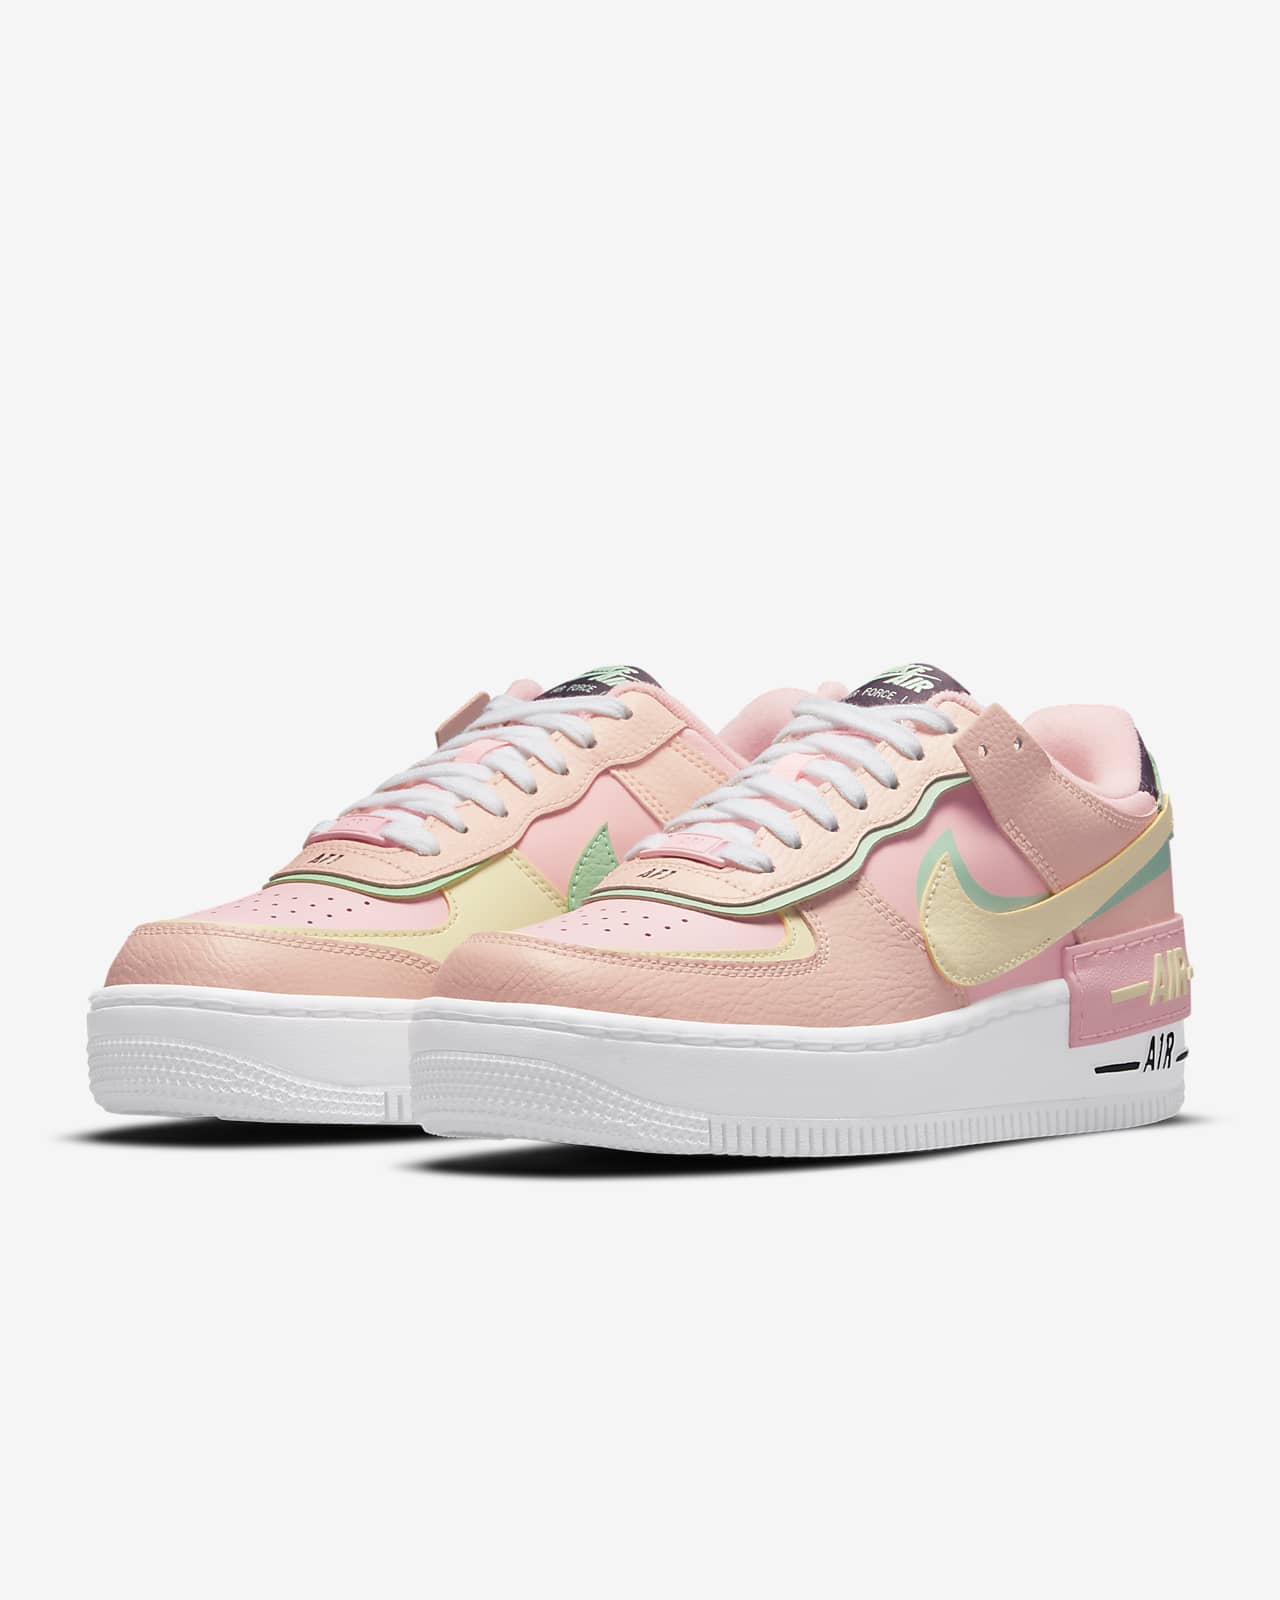 Nike Air Force 1 Shadow Women's Shoes 